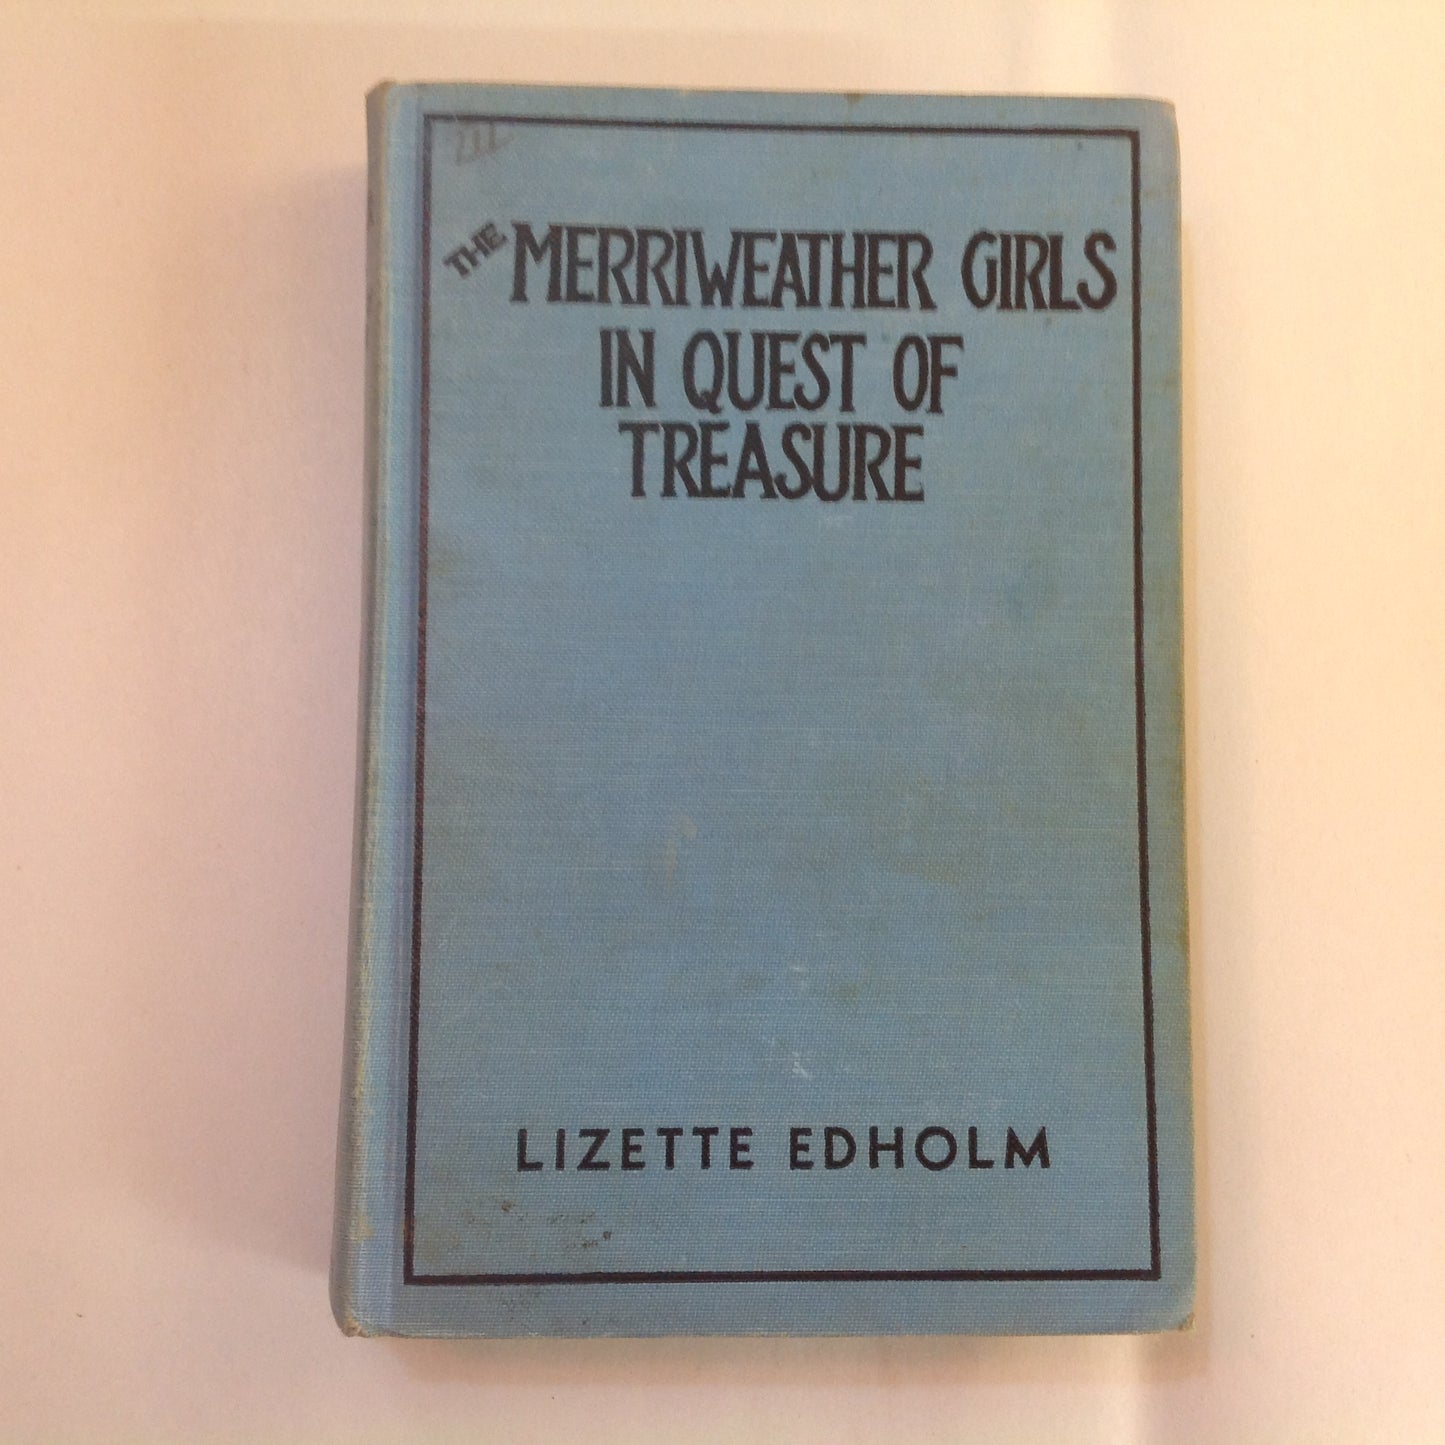 Vintage 1932 Hardcover The Merriweather Girls in Quest of Treasure Lizette Edholm